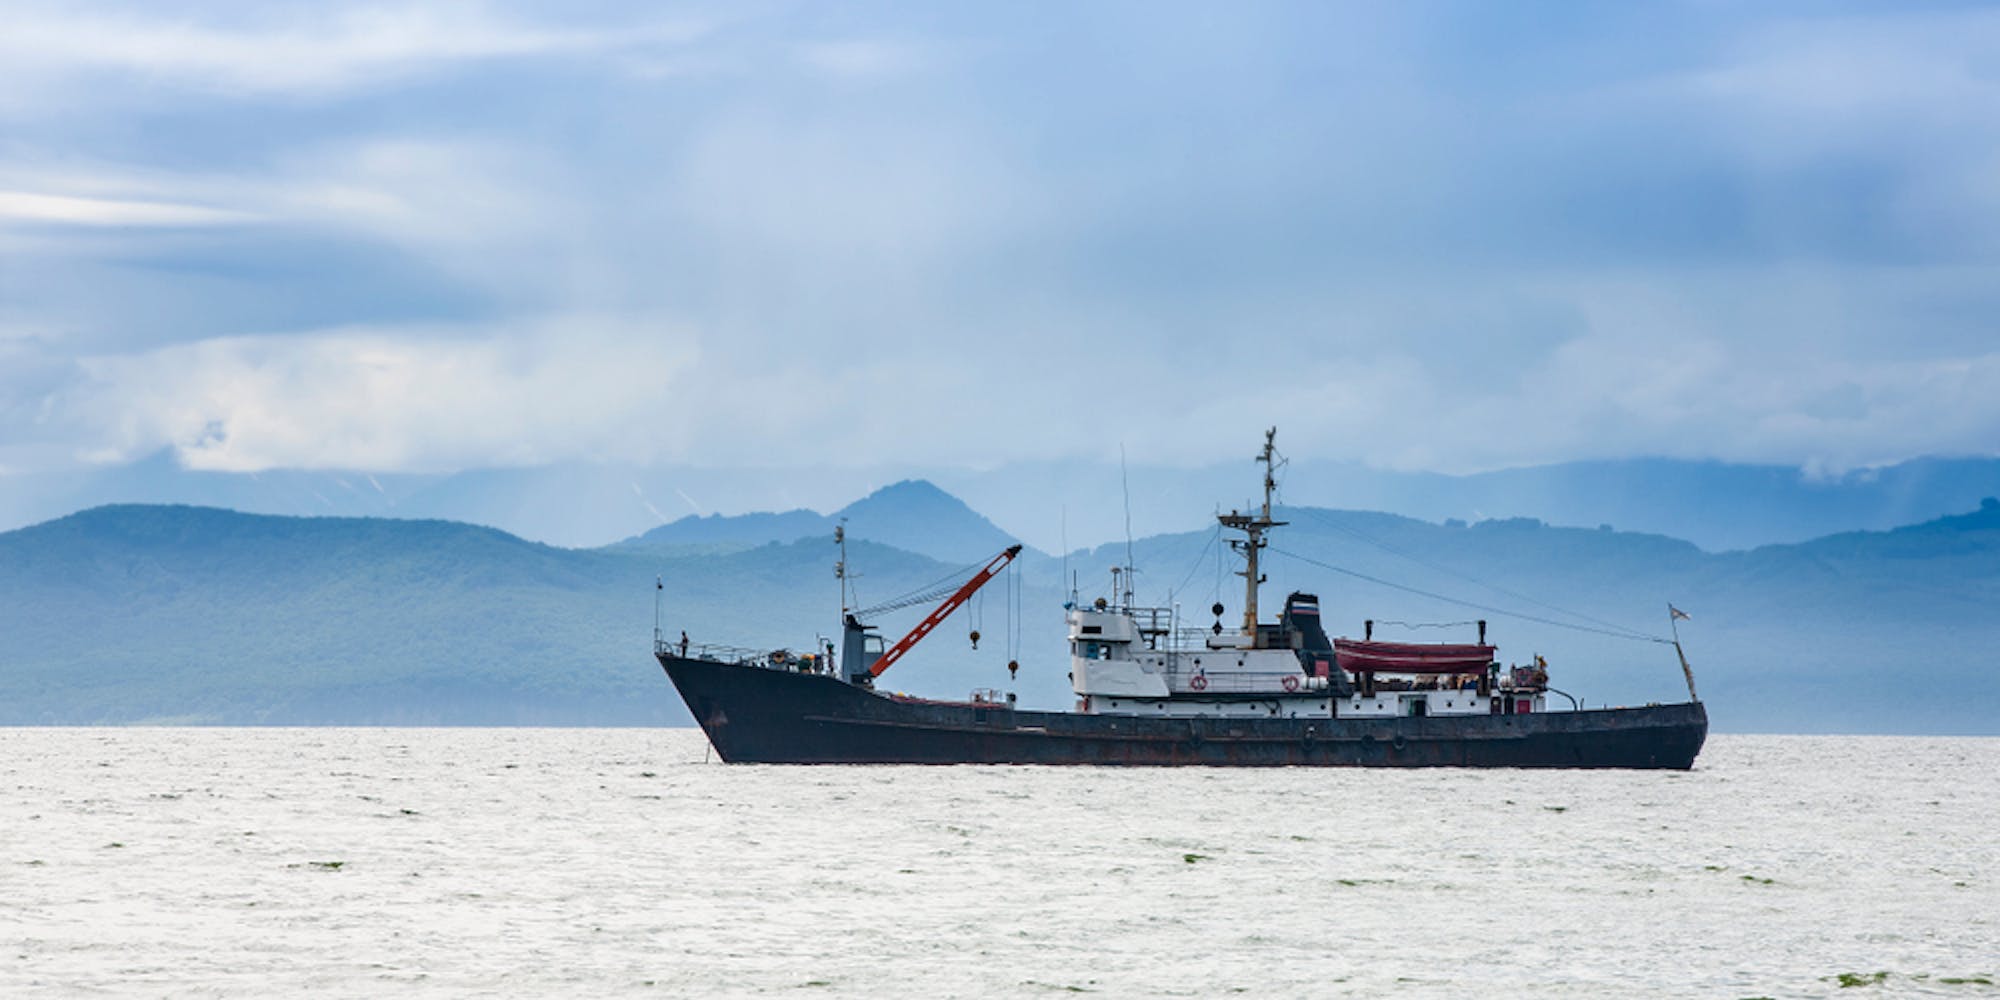 Large,Fishing,Vessel,On,The,Background,Of,Hills,And,Volcanoes